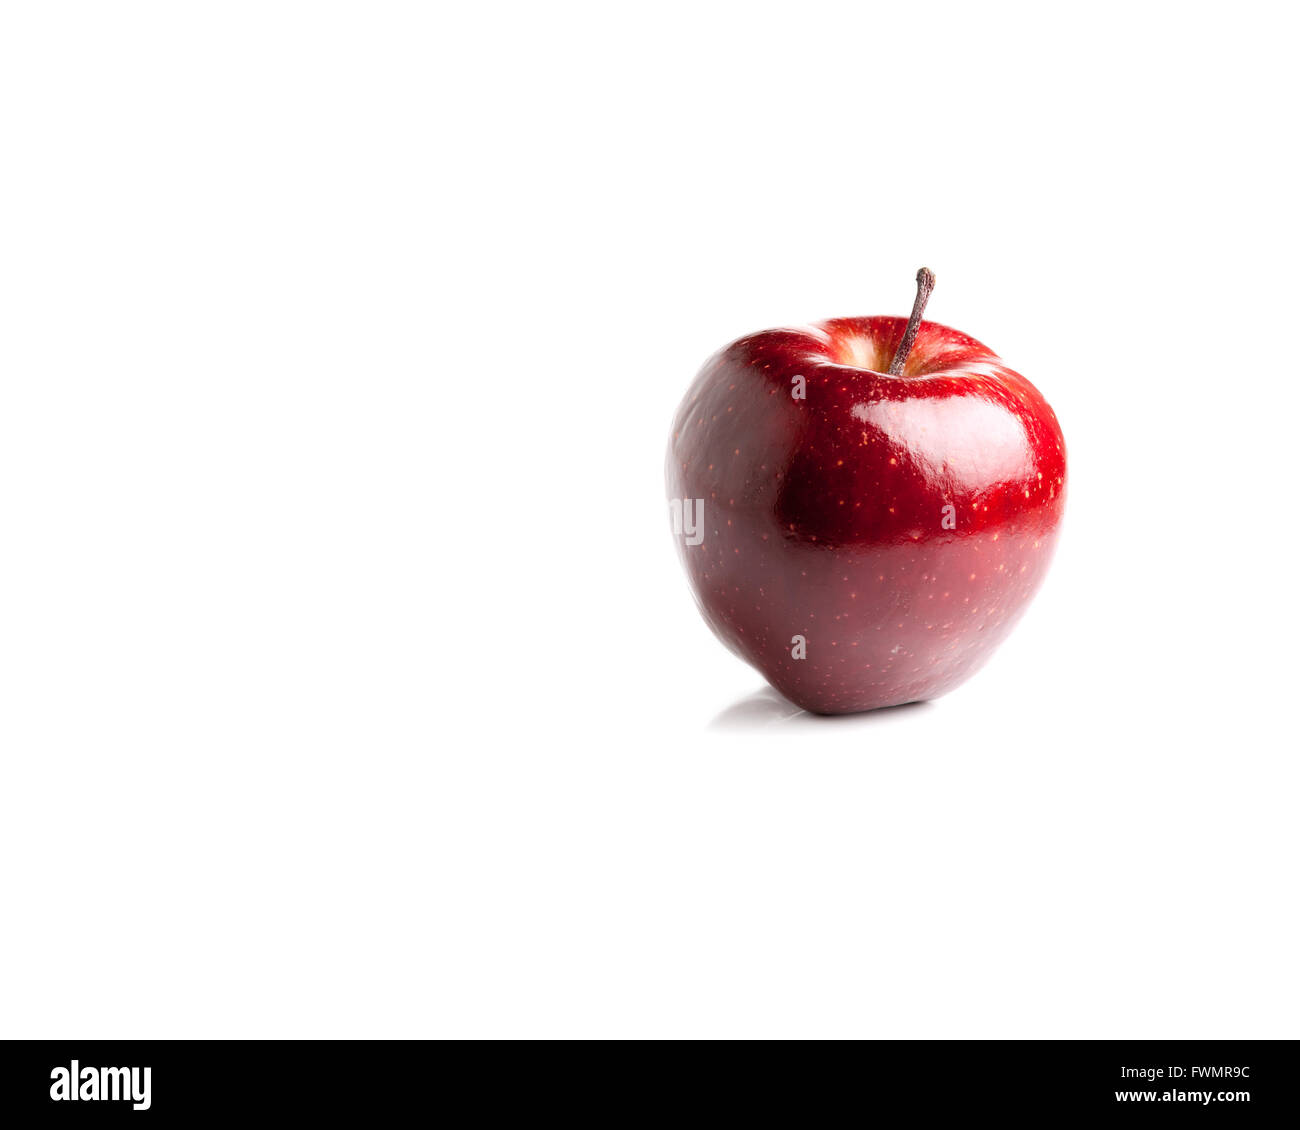 Red Delicious Apple on a white background with copy space suitable for healthy eating backgrounds or concepts Stock Photo